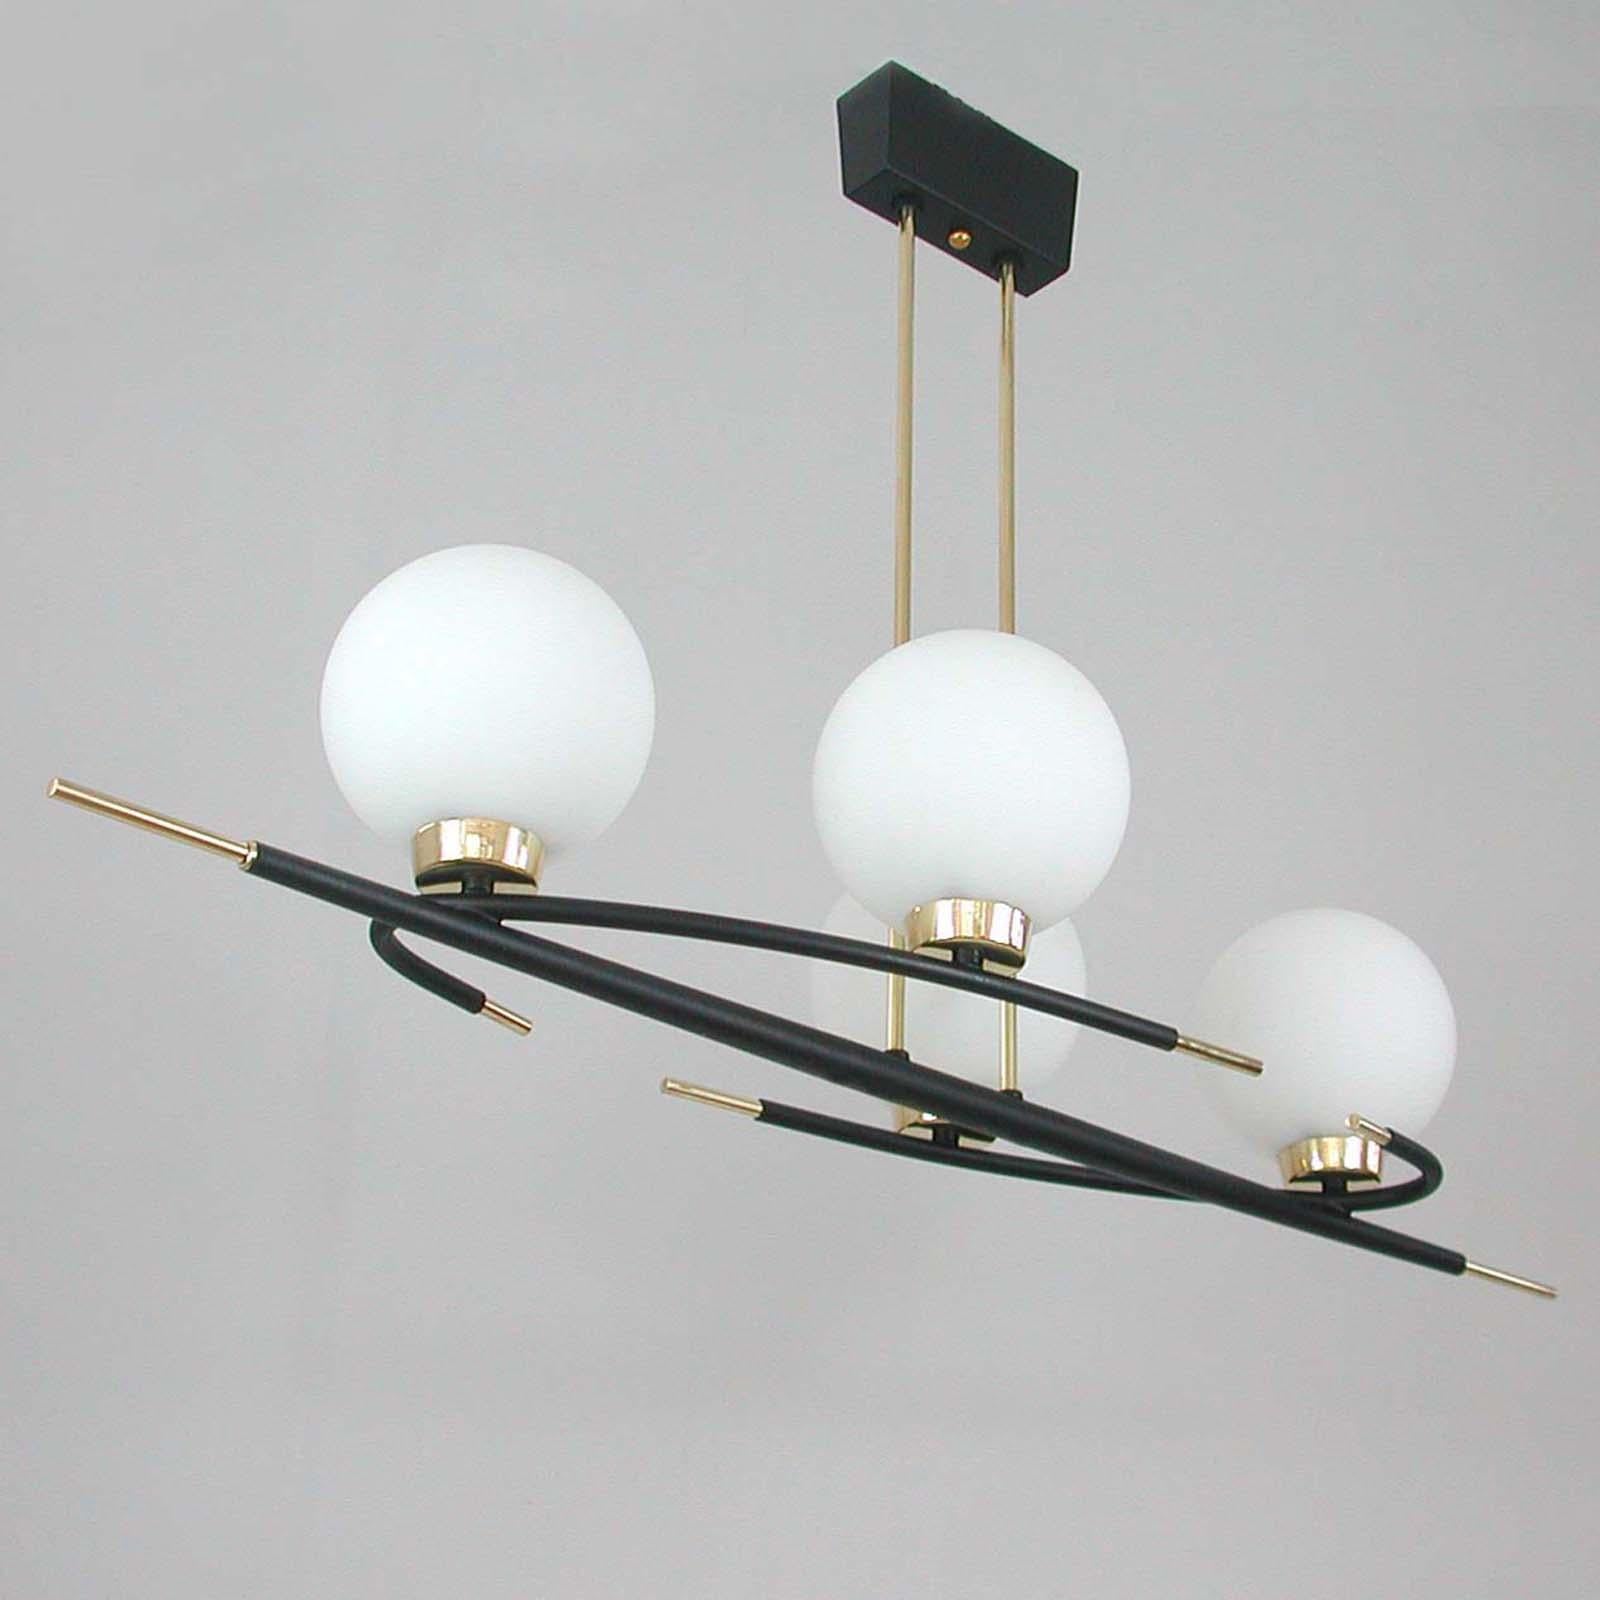 This unusual Maison Arlus ceiling light was designed and manufactured in France in the 1960s. It is made of black lacquered metal and brass with 4 white frosted glass lamp shades. 

The lamp requires 4 French B22 bayonet bulbs. Bulbs will be added